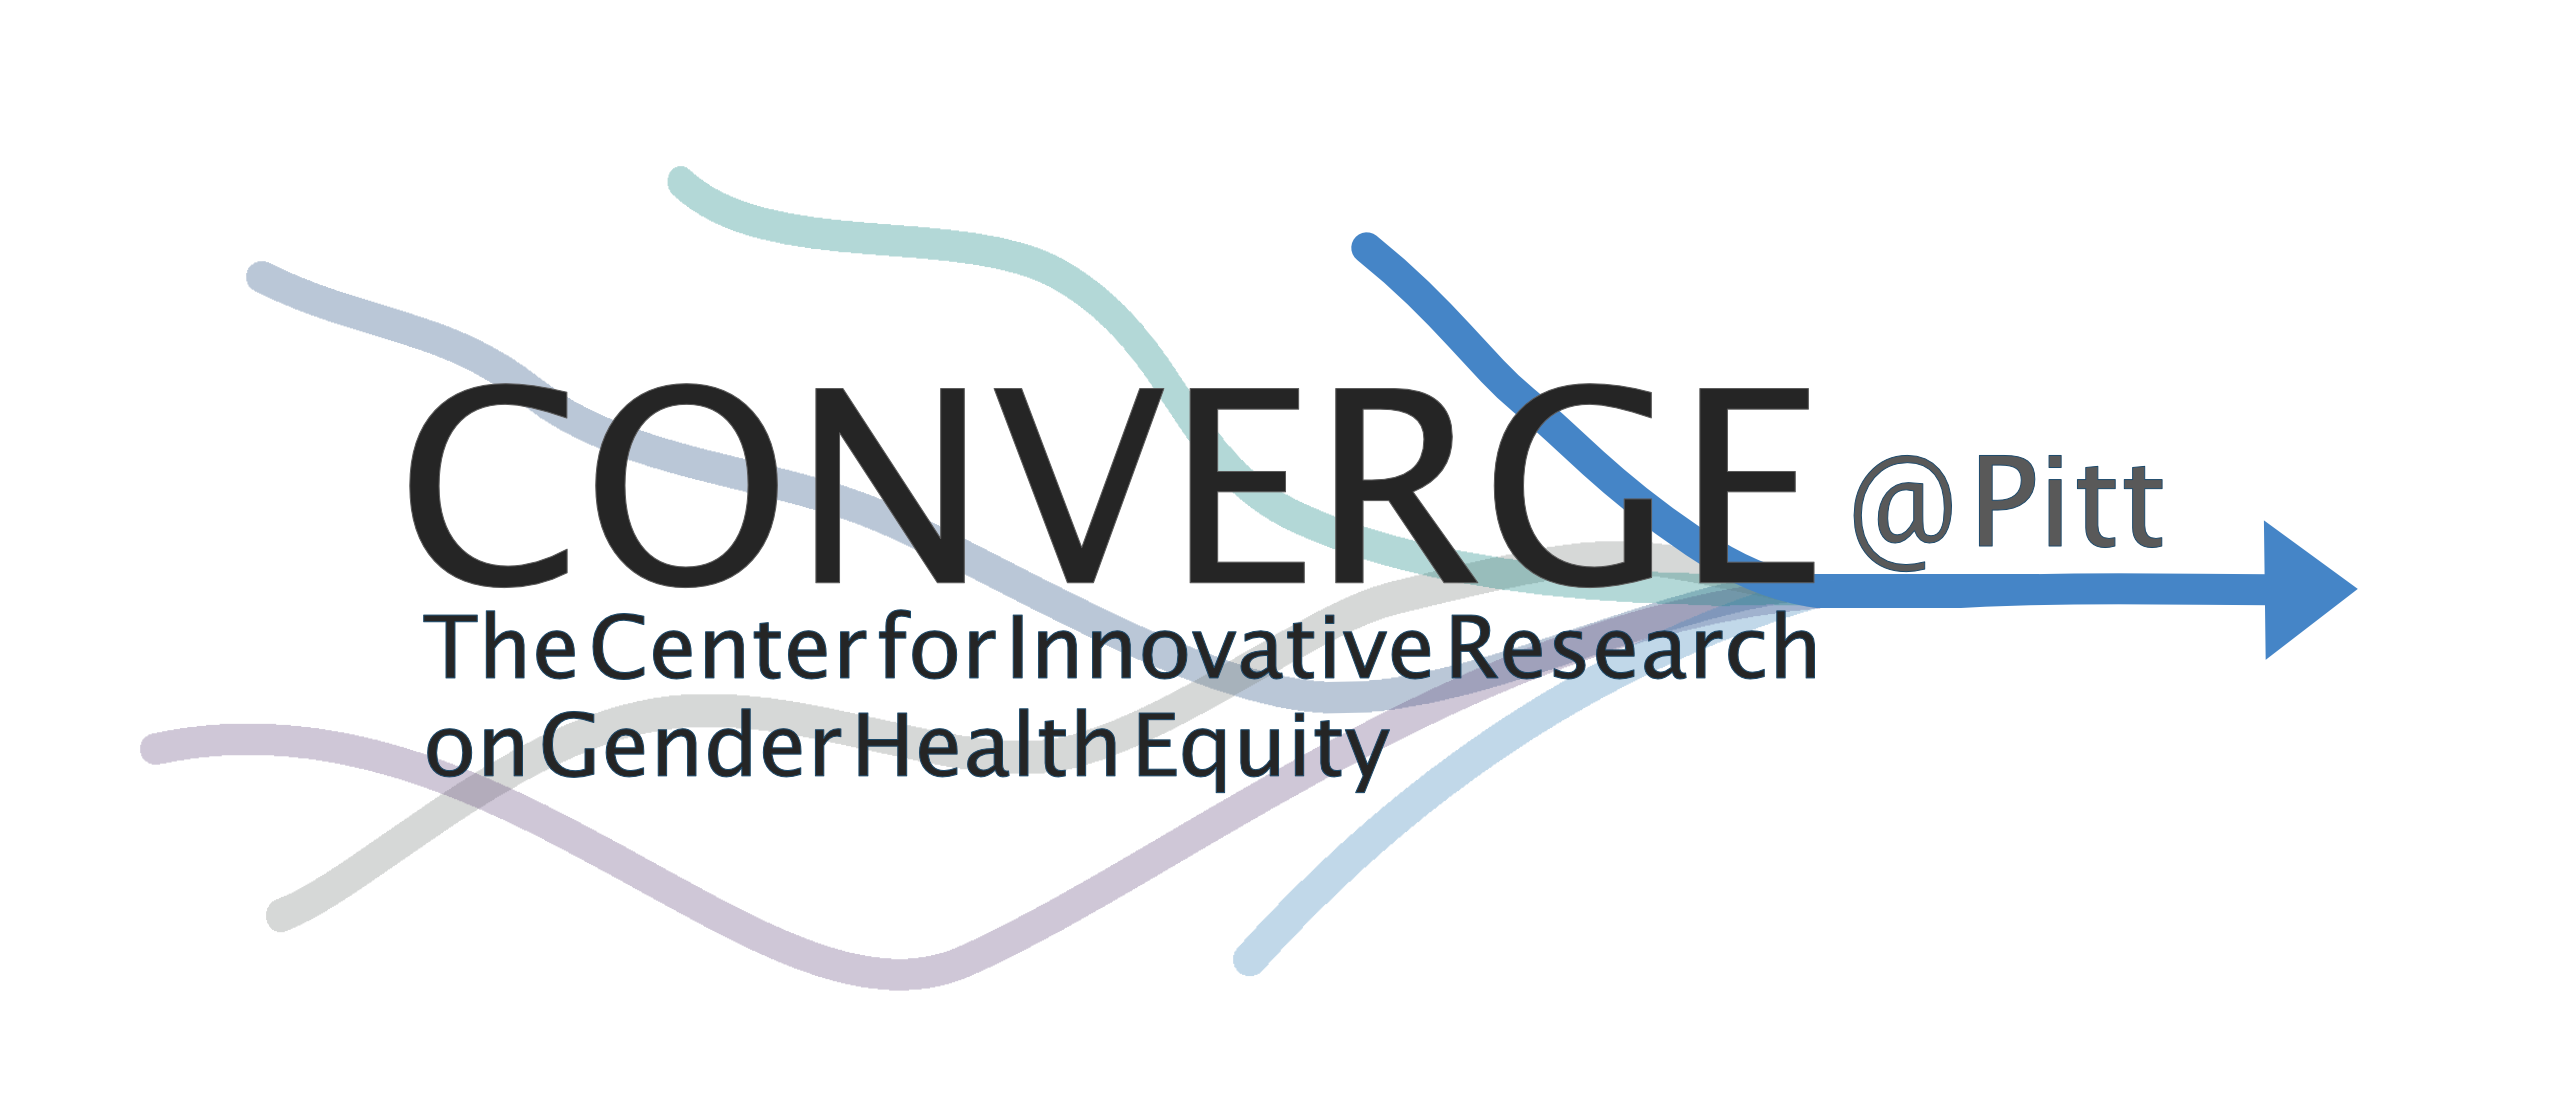 CONVERGE logo - The Center for Innovative Research on Gender Health Equity 